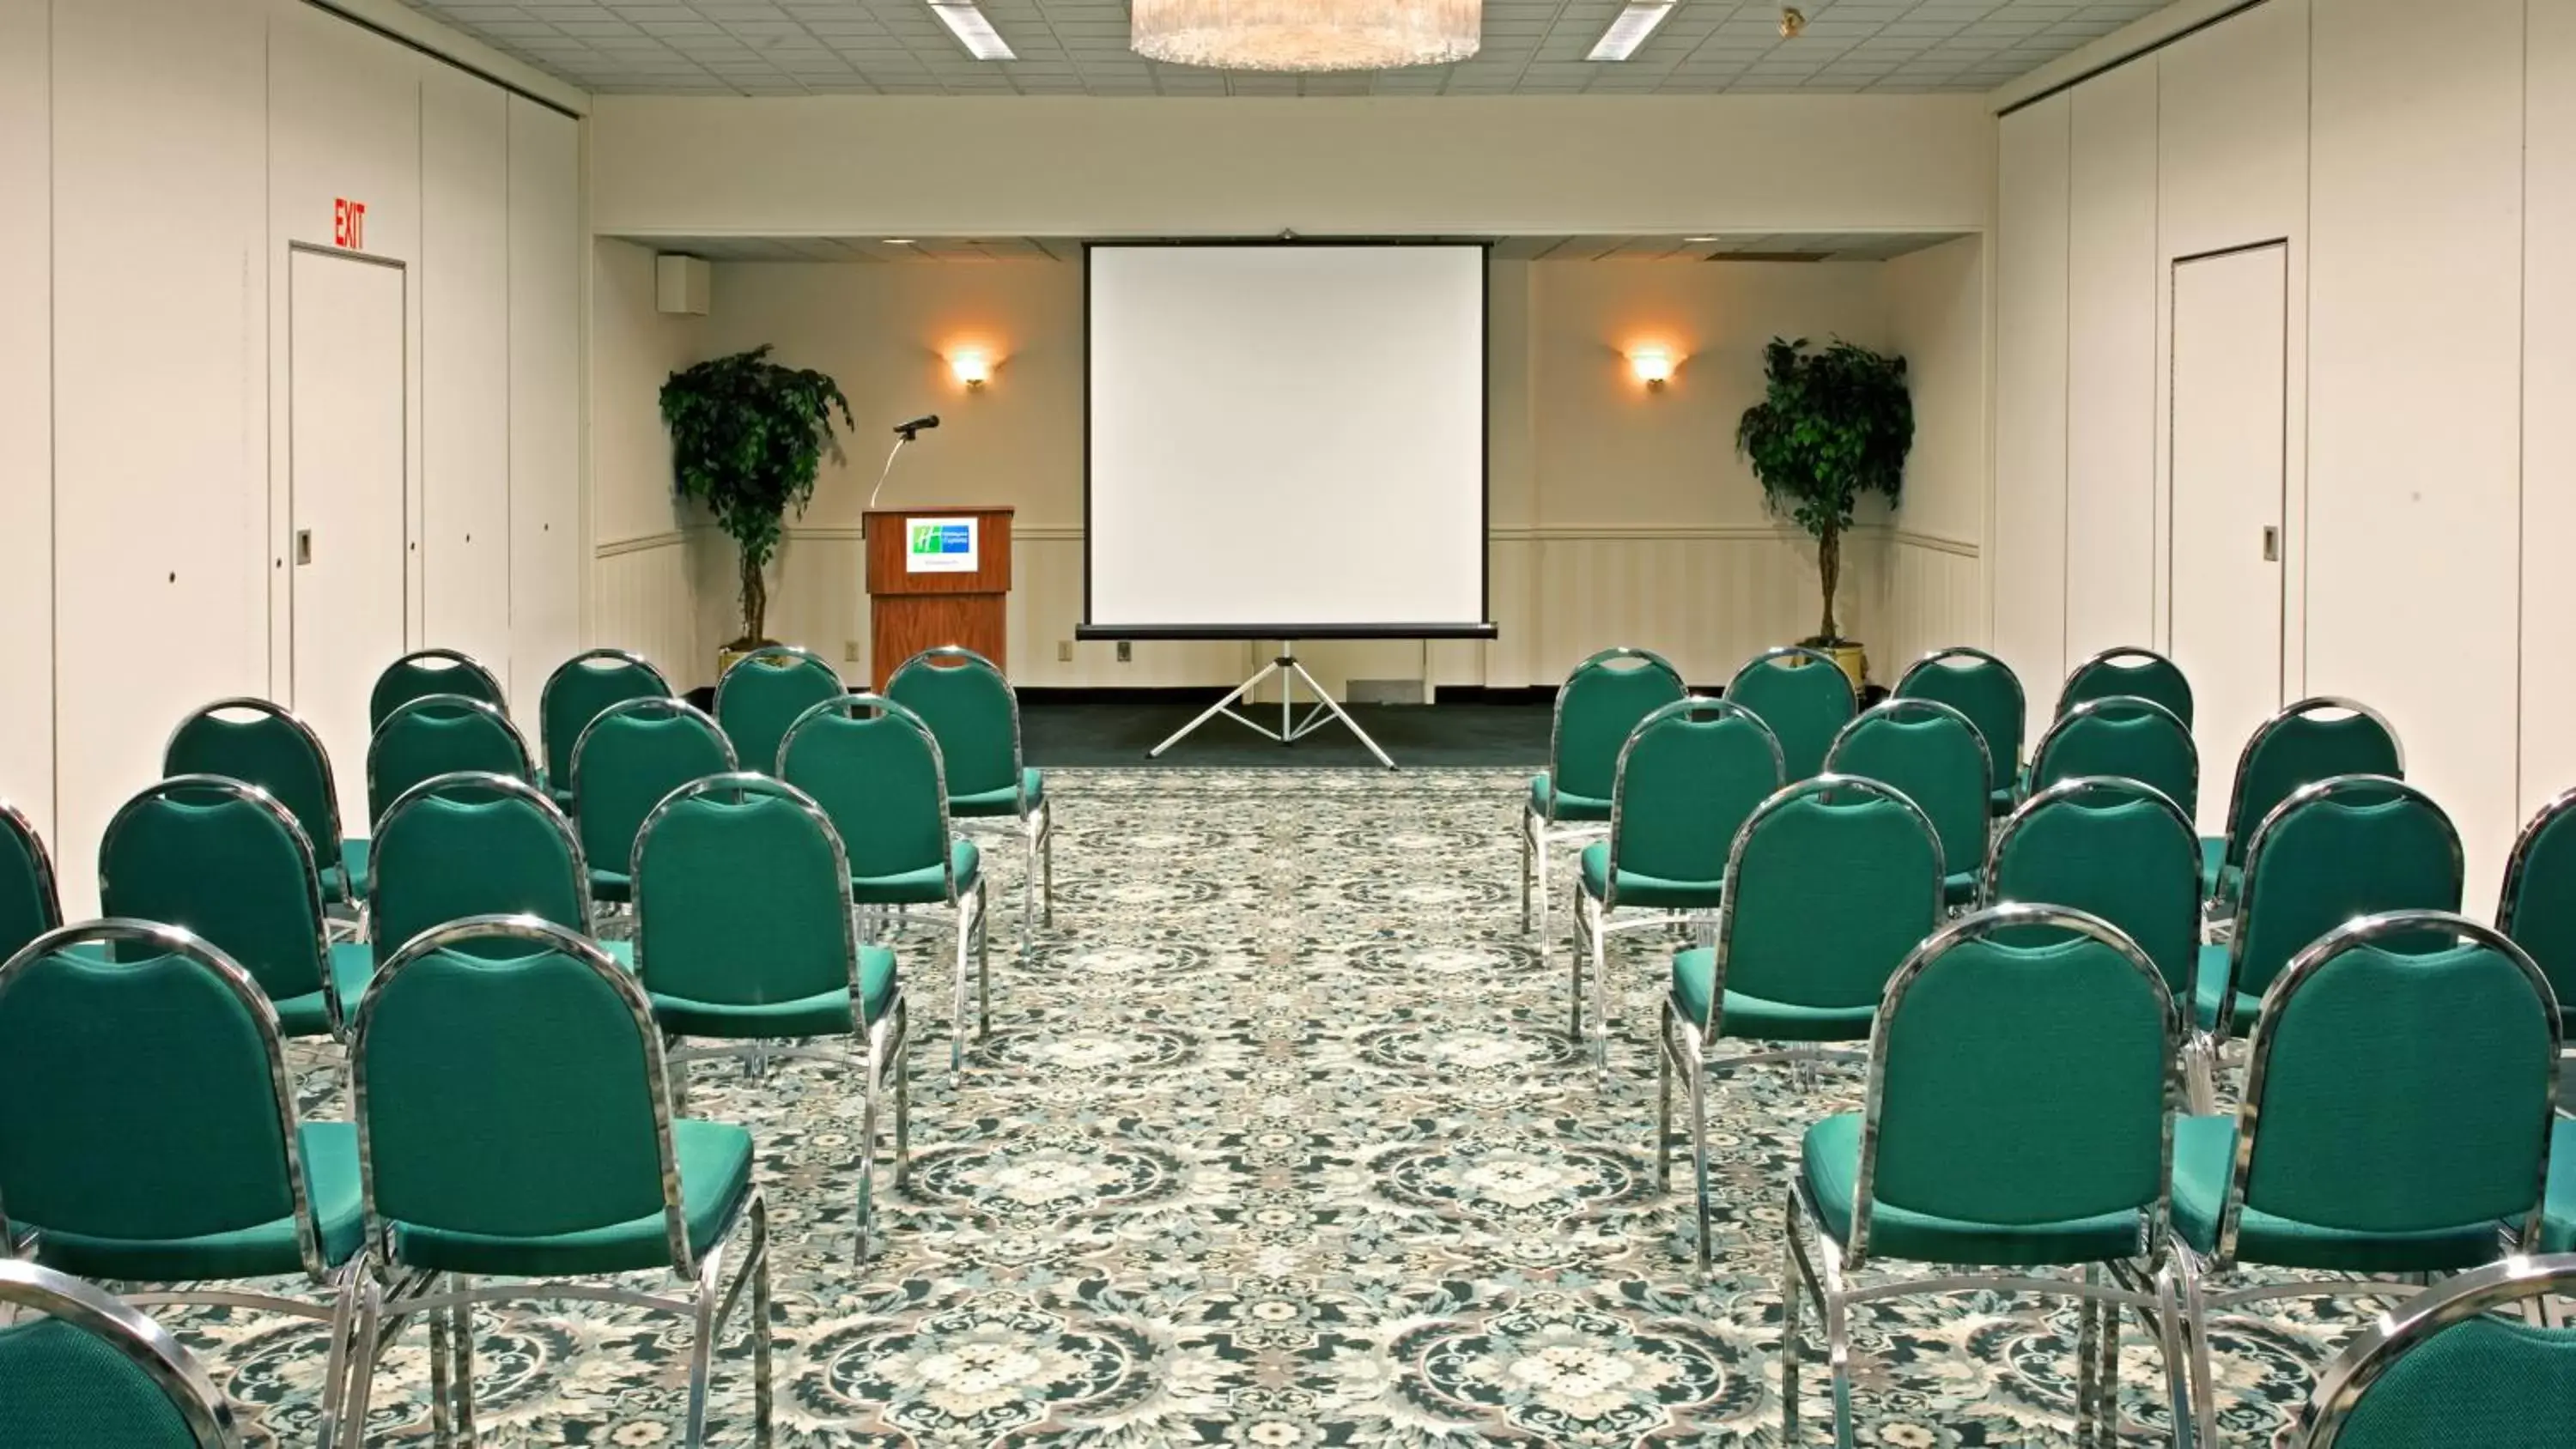 Business facilities in Quality Inn Horseheads